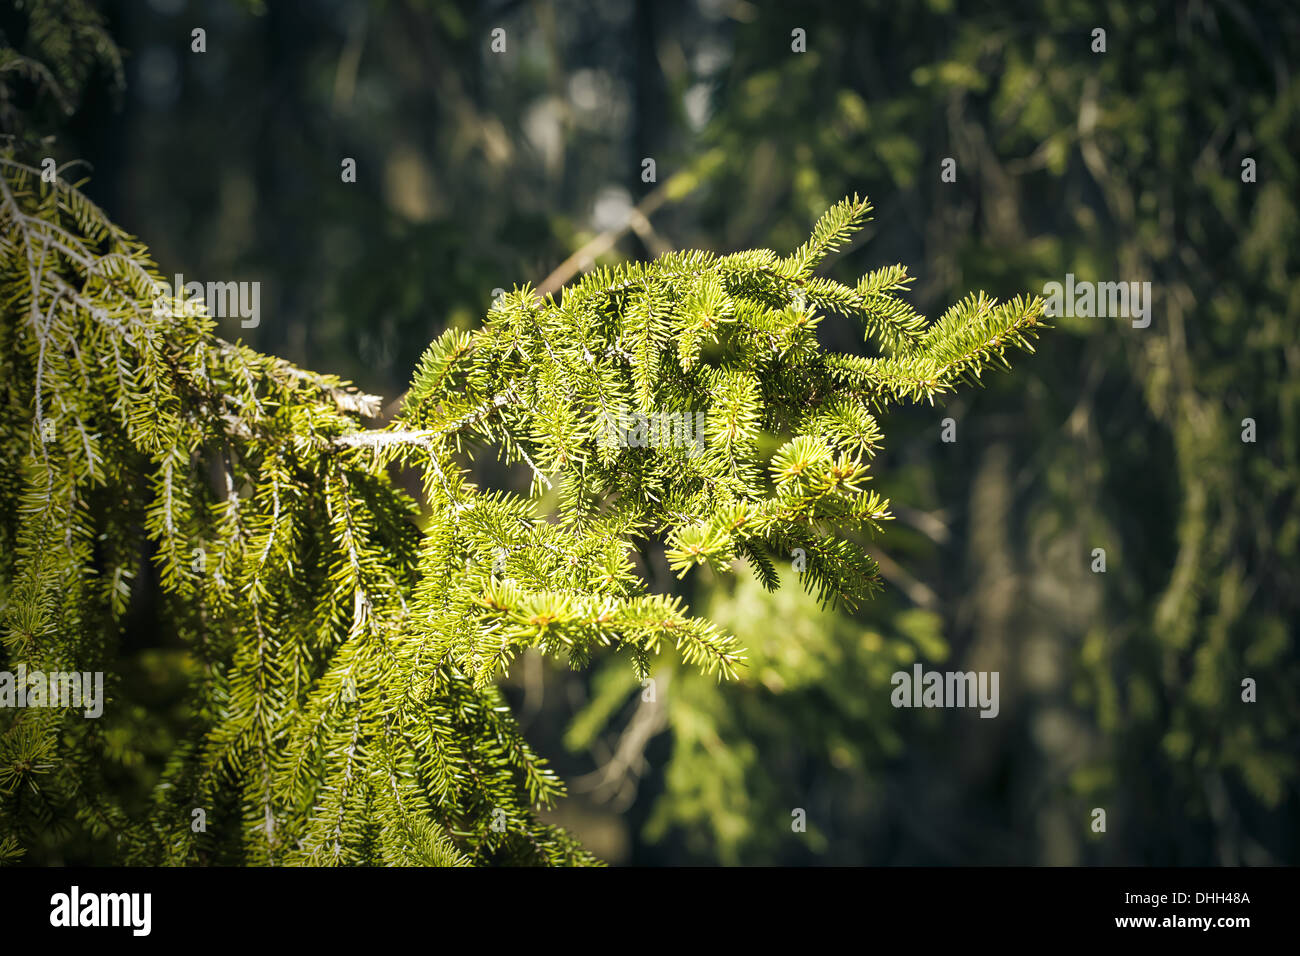 Sunlit spruce tree branch in the backwoods Stock Photo